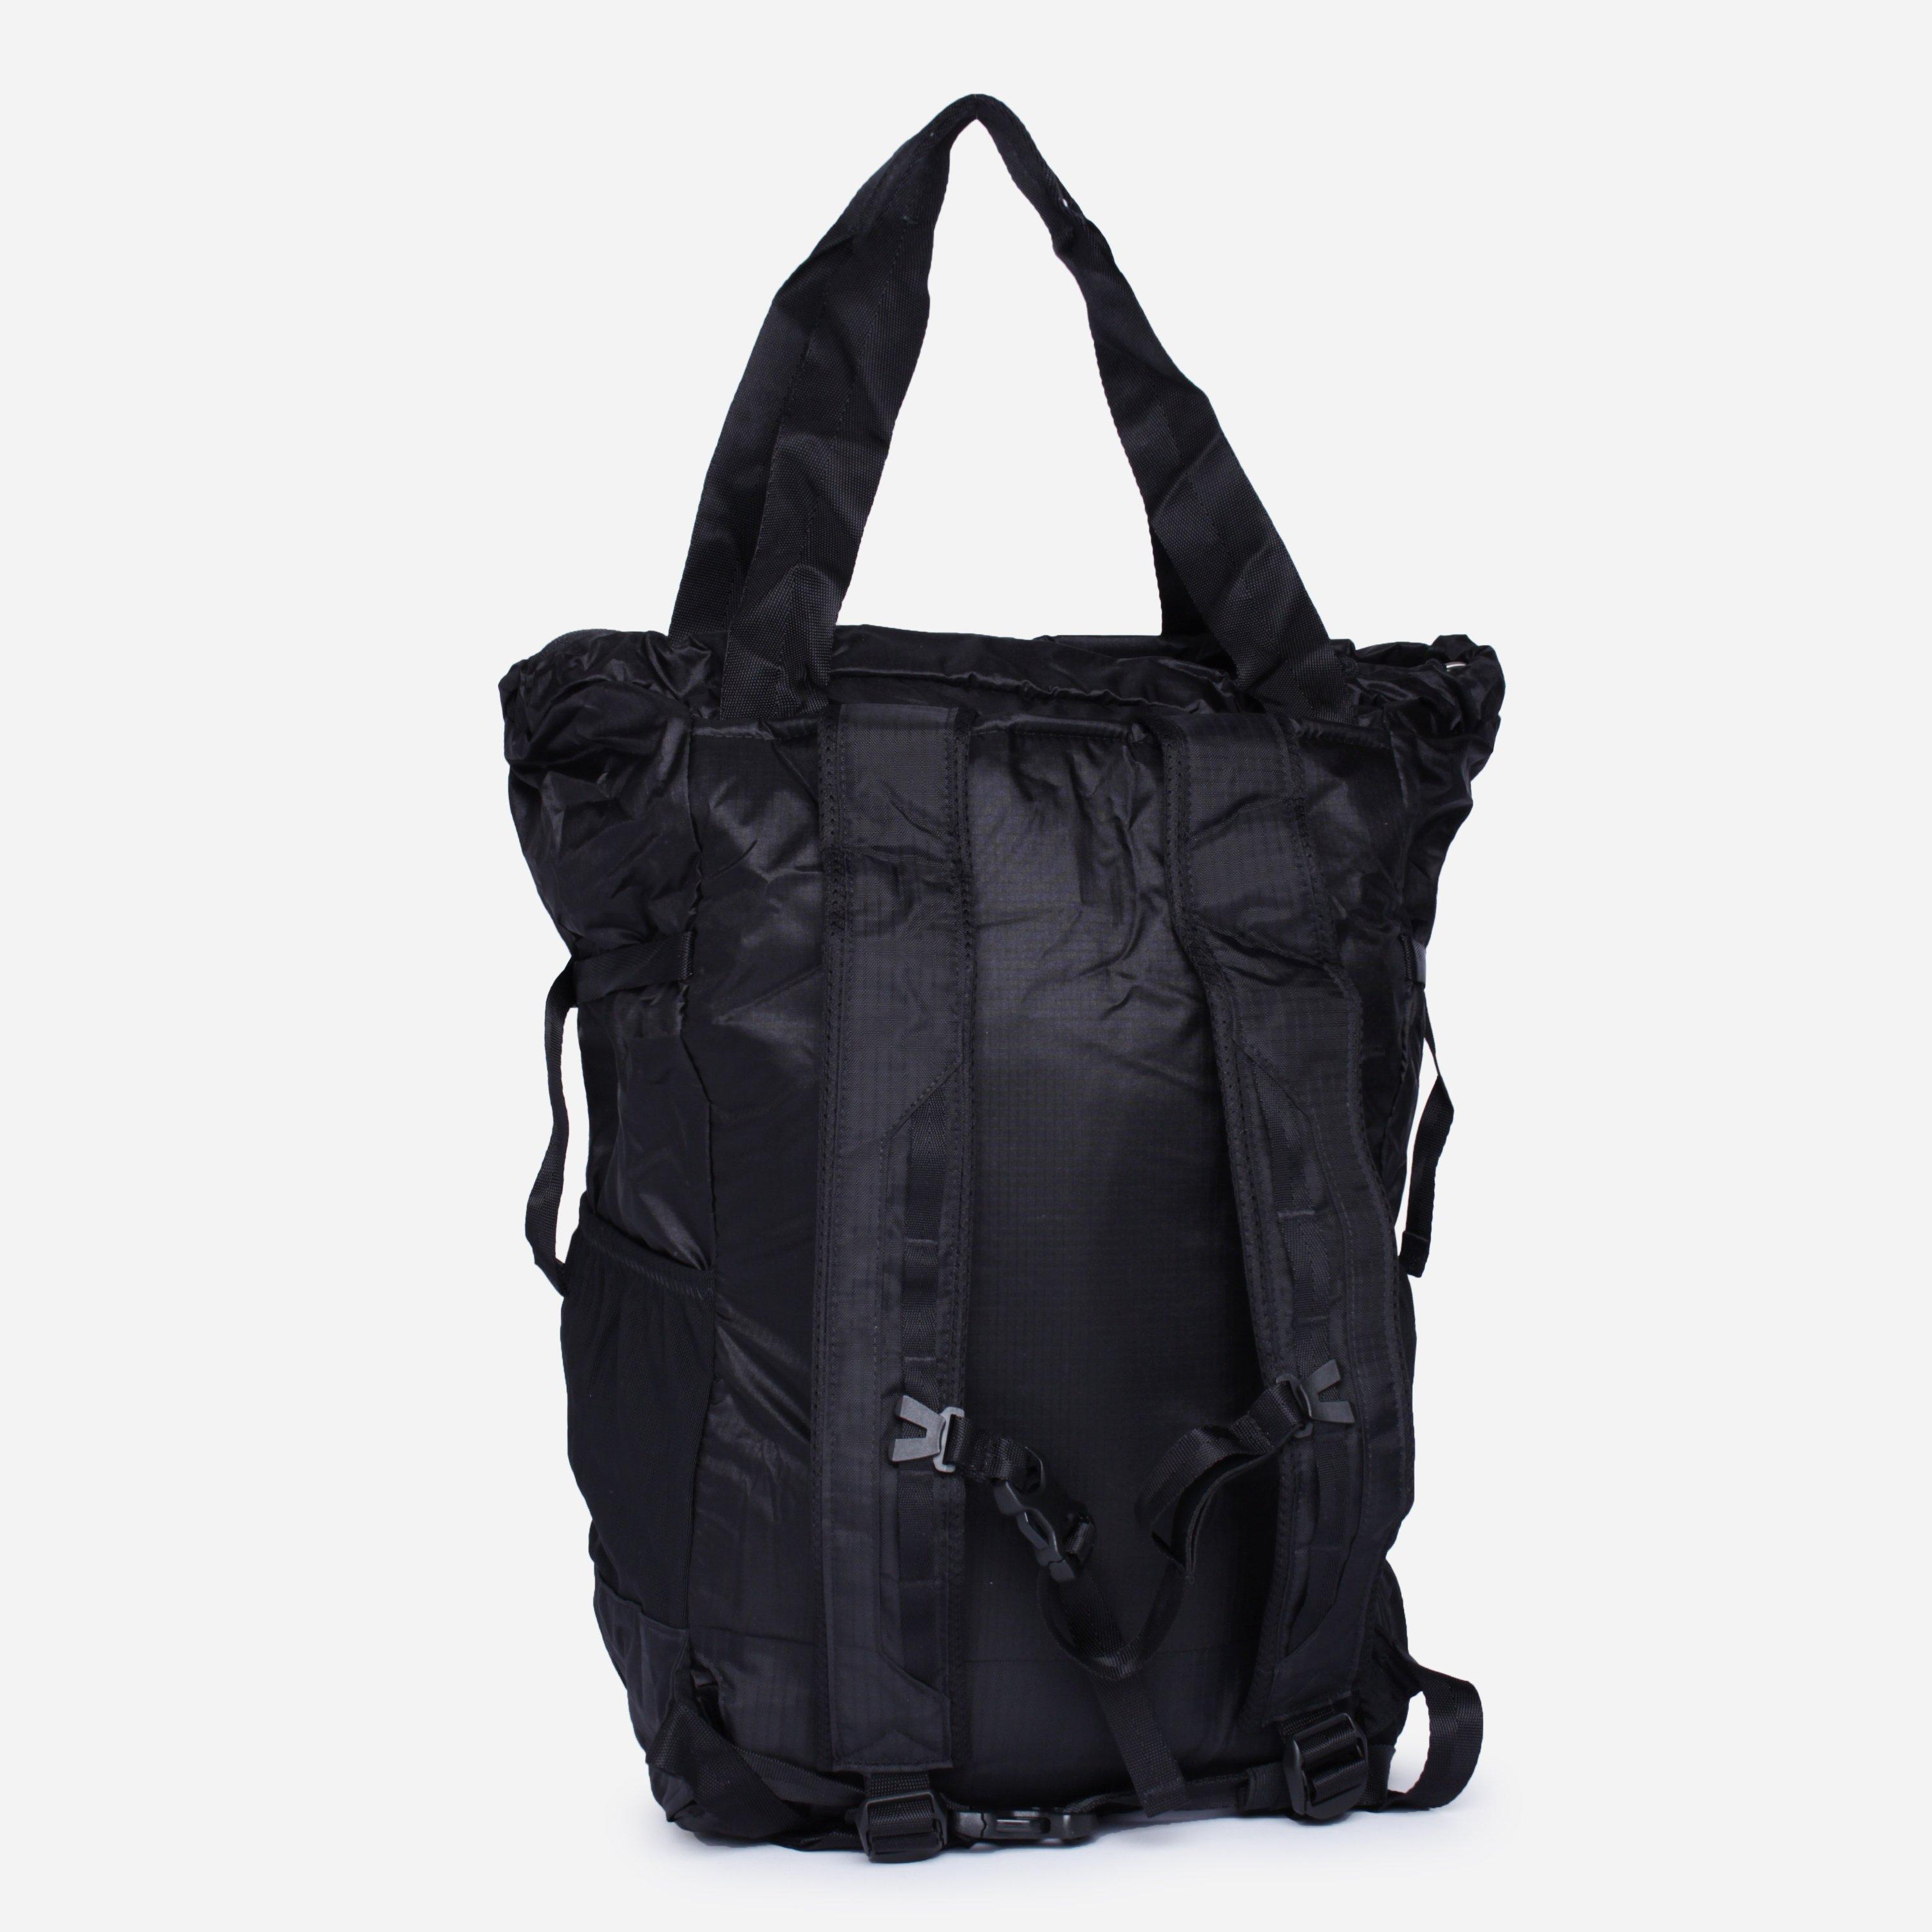 Patagonia Bags For Men For Sale | IUCN Water